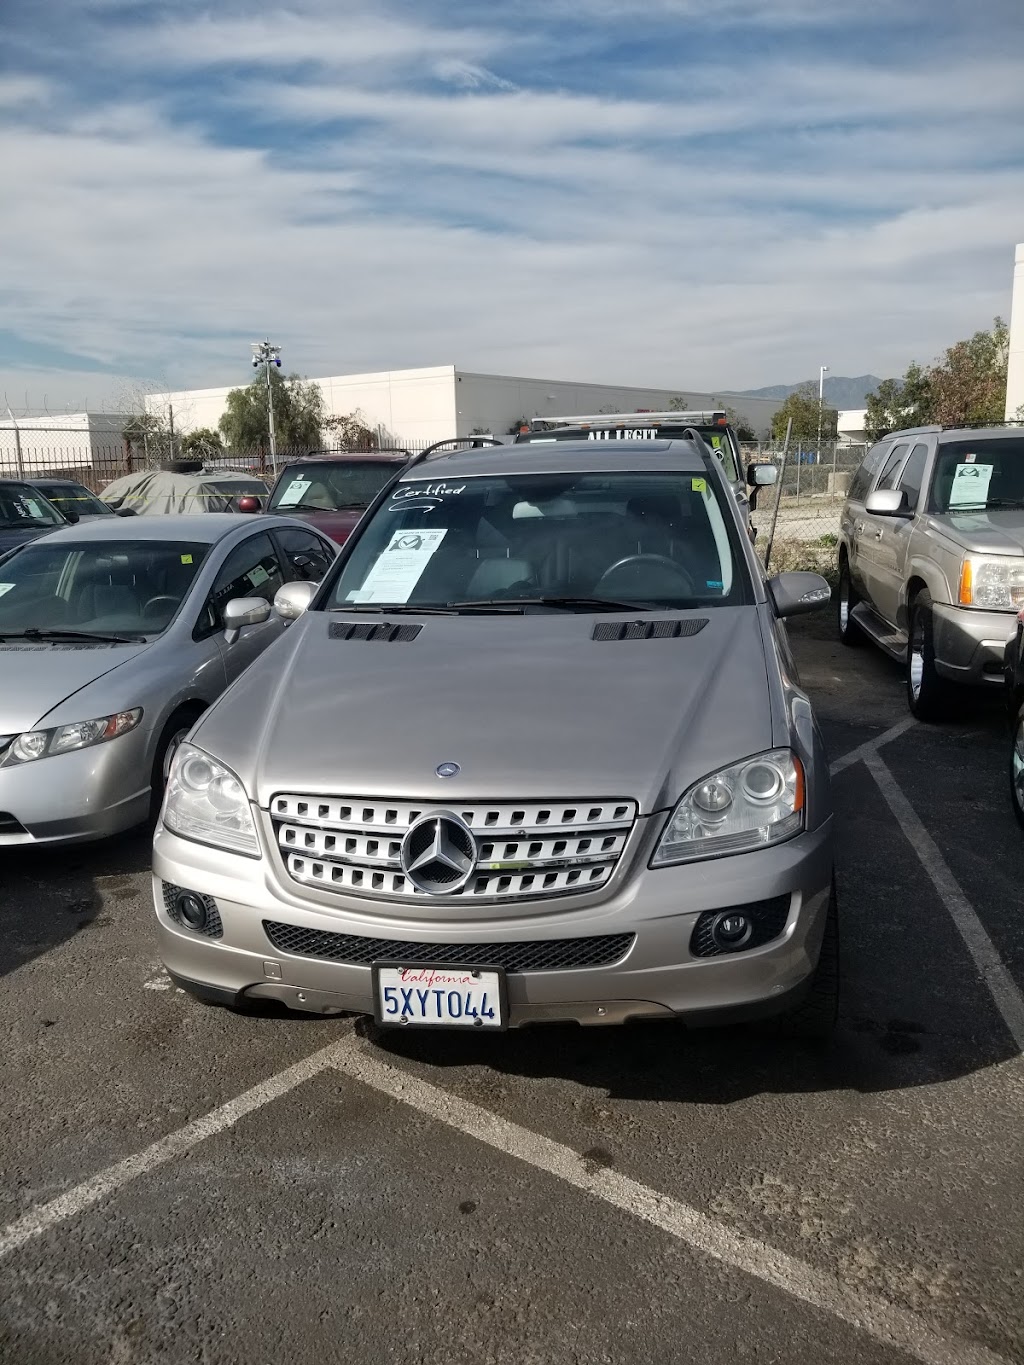 SoCal Auto Auctions | 17050 Foothill Blvd Suite A, Fontana, CA 92335, USA | Phone: (909) 930-1887